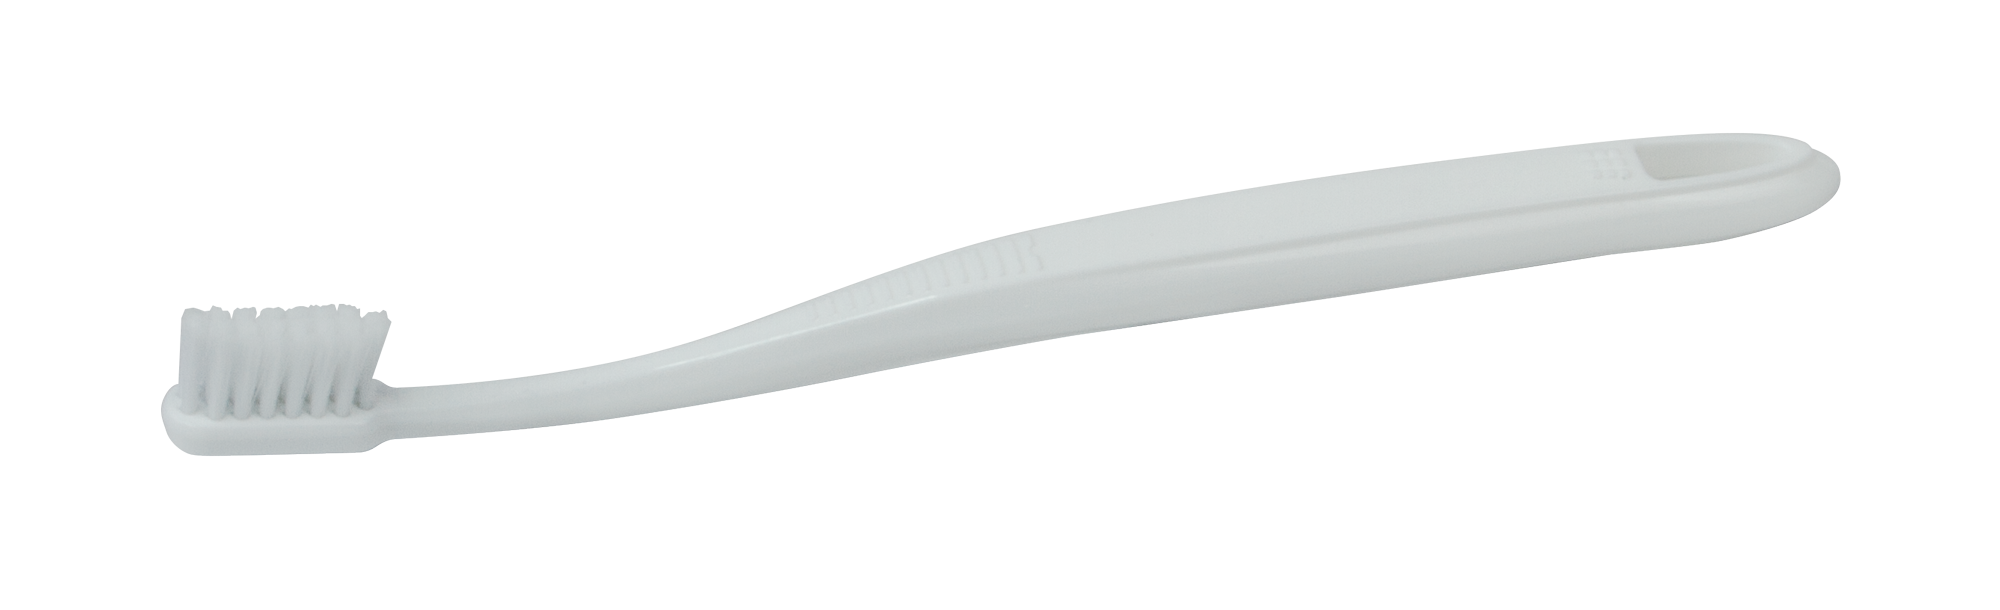 Soft-Long Implant & Surgery Toothbrushes